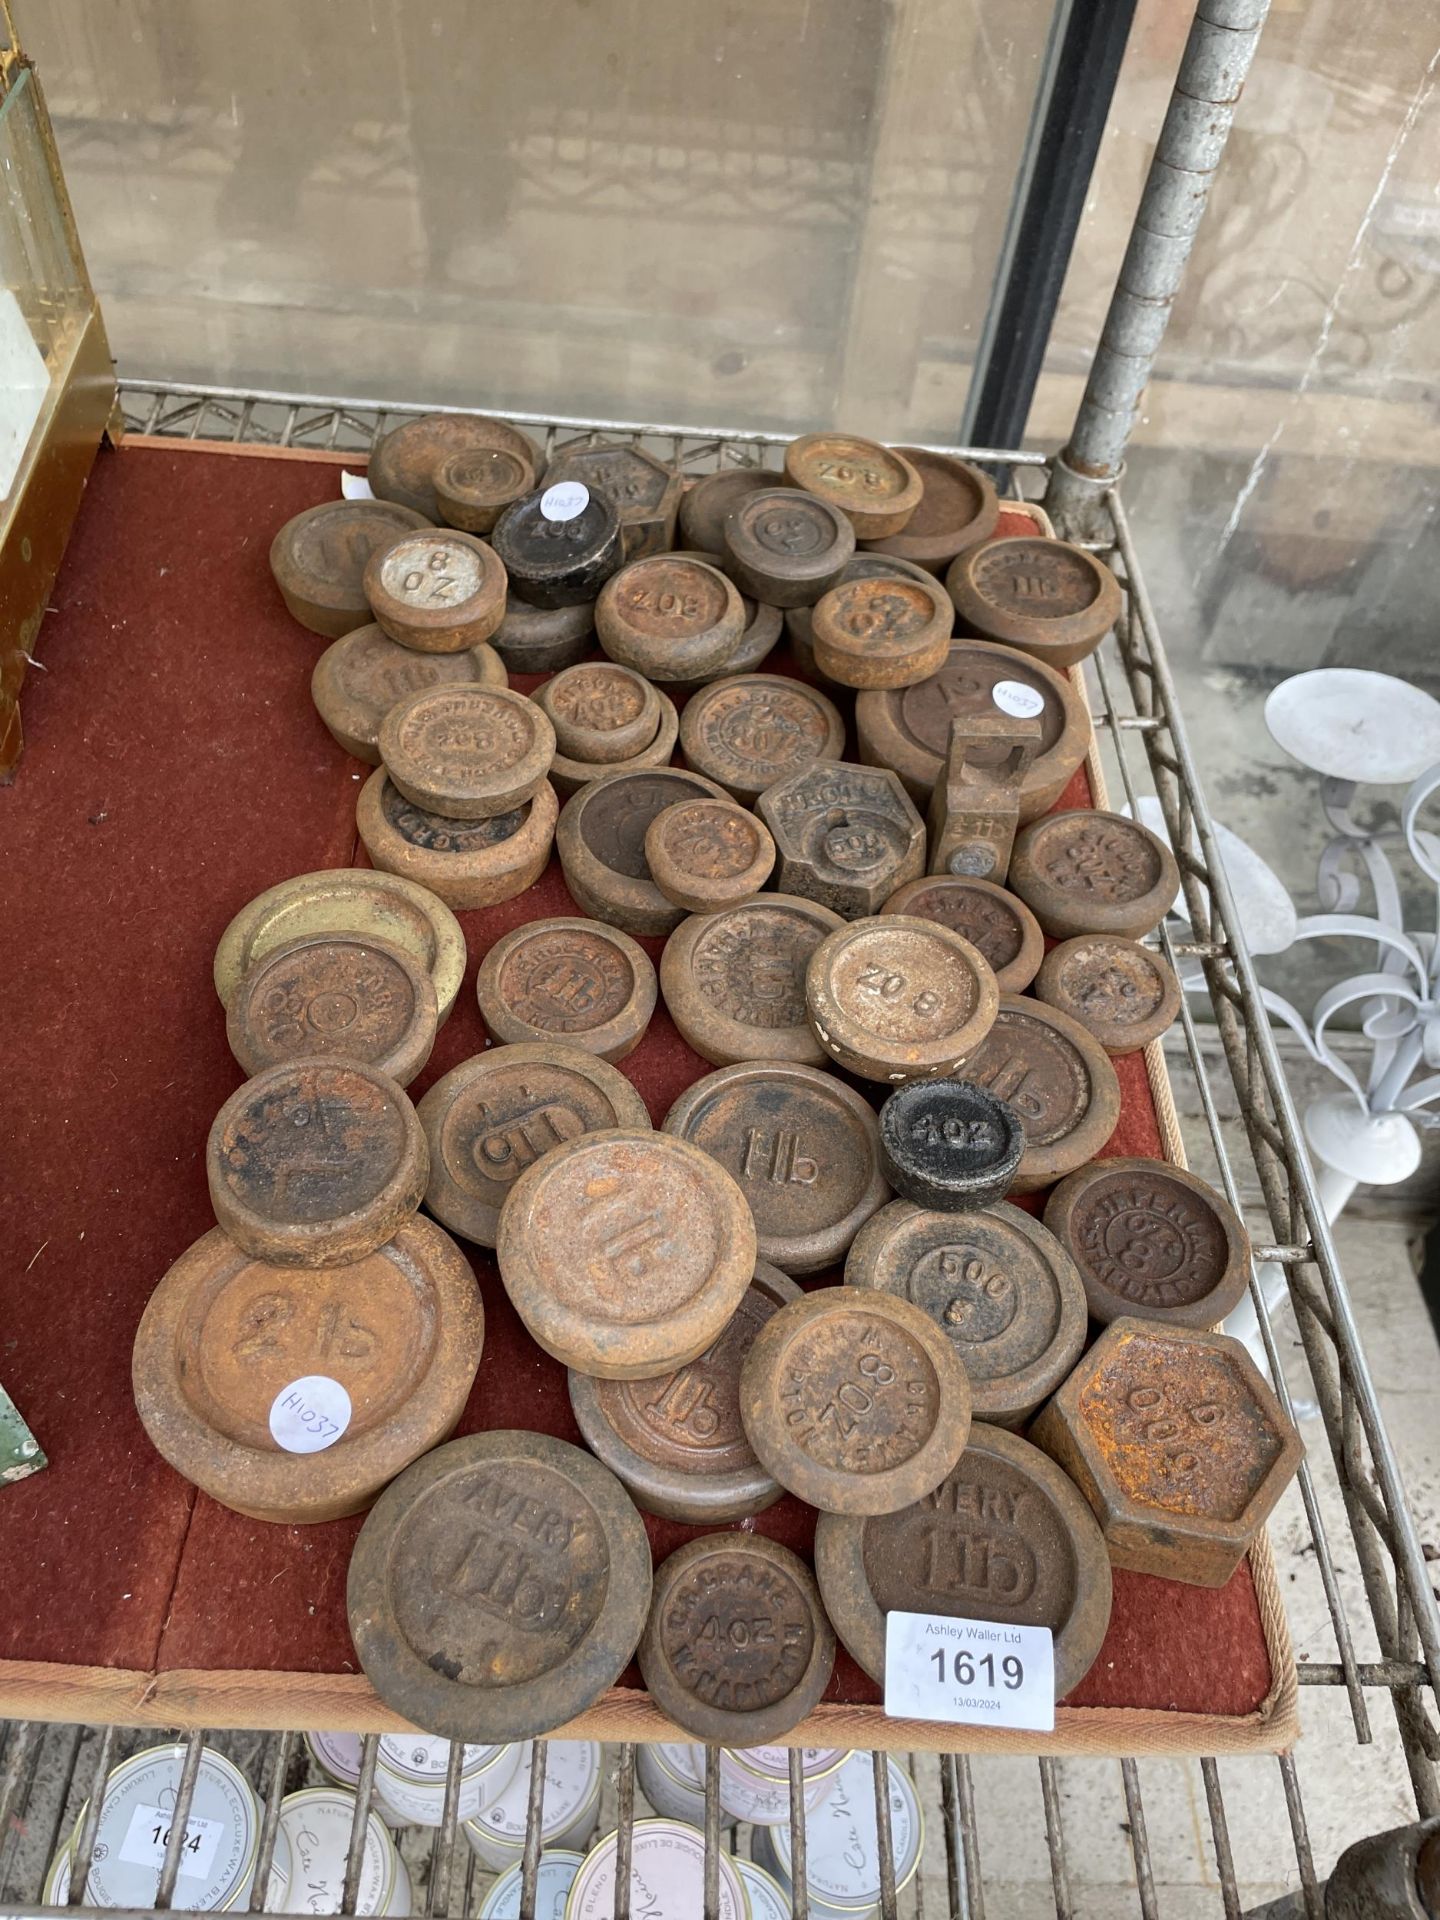 A LARGE QUANTITY OF VINTAGE CAST IRON WEIGHTS